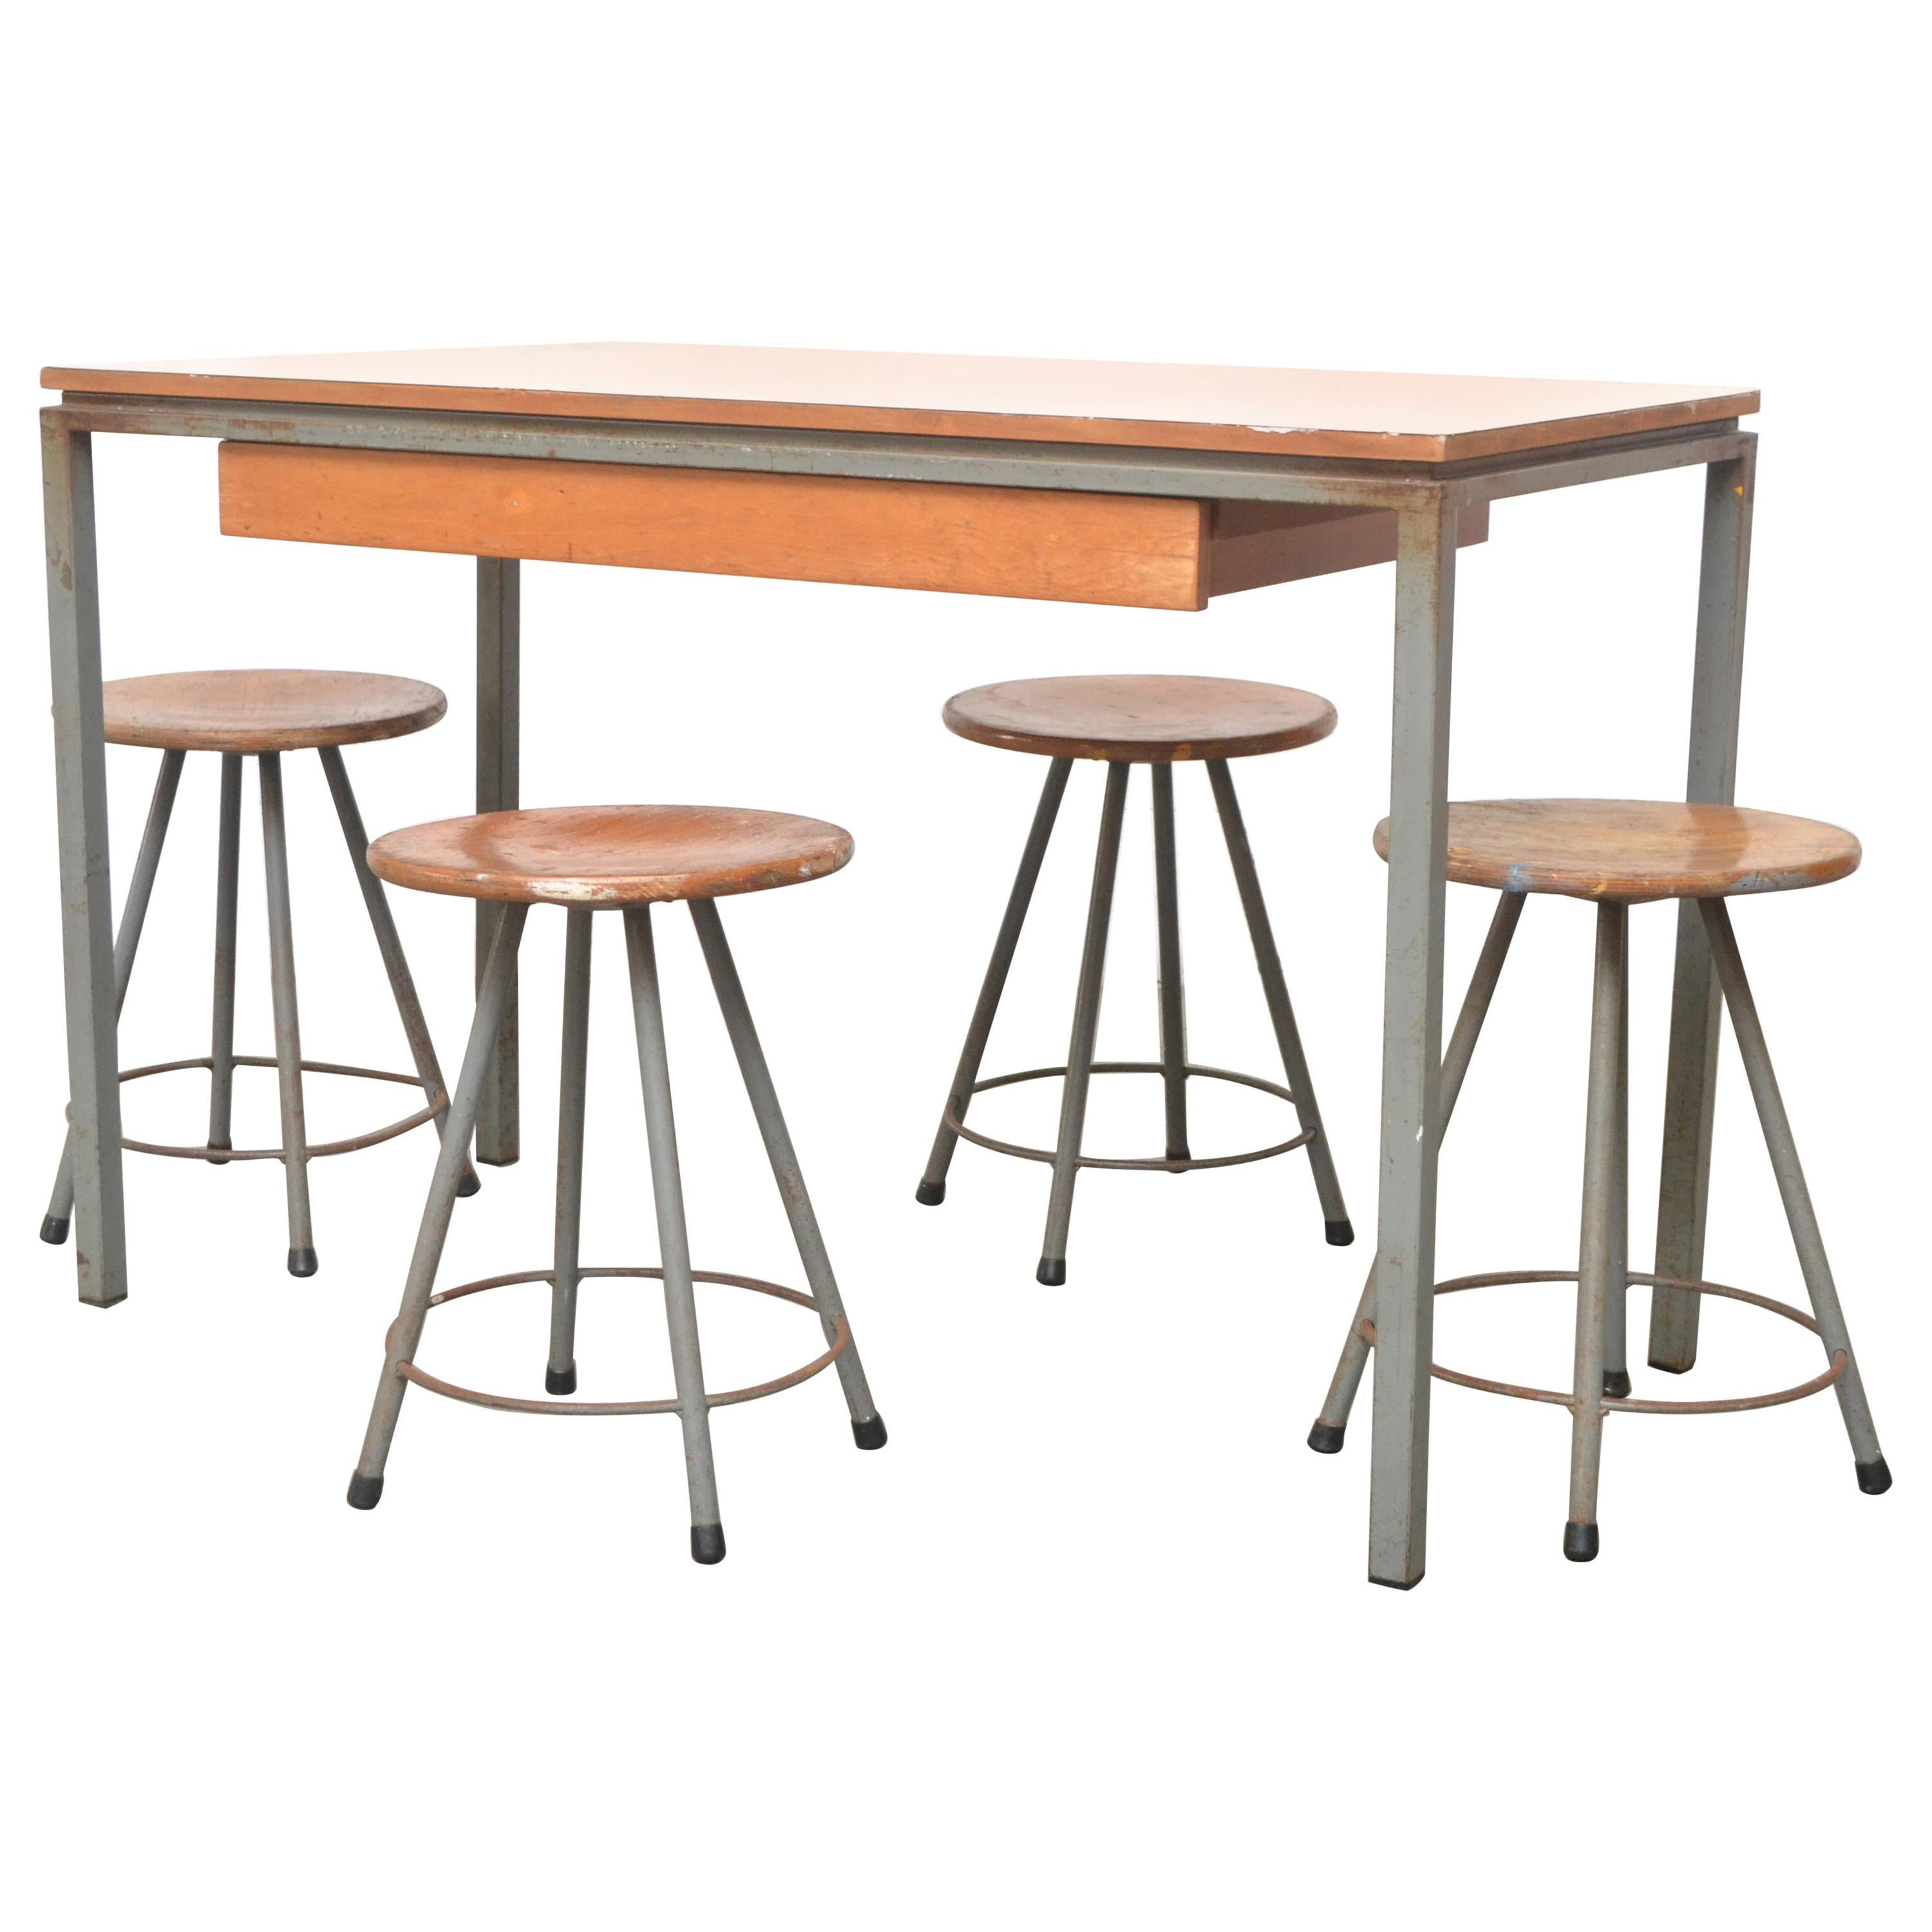 Early Edition Marko Industrial Metal Table and Stool Set